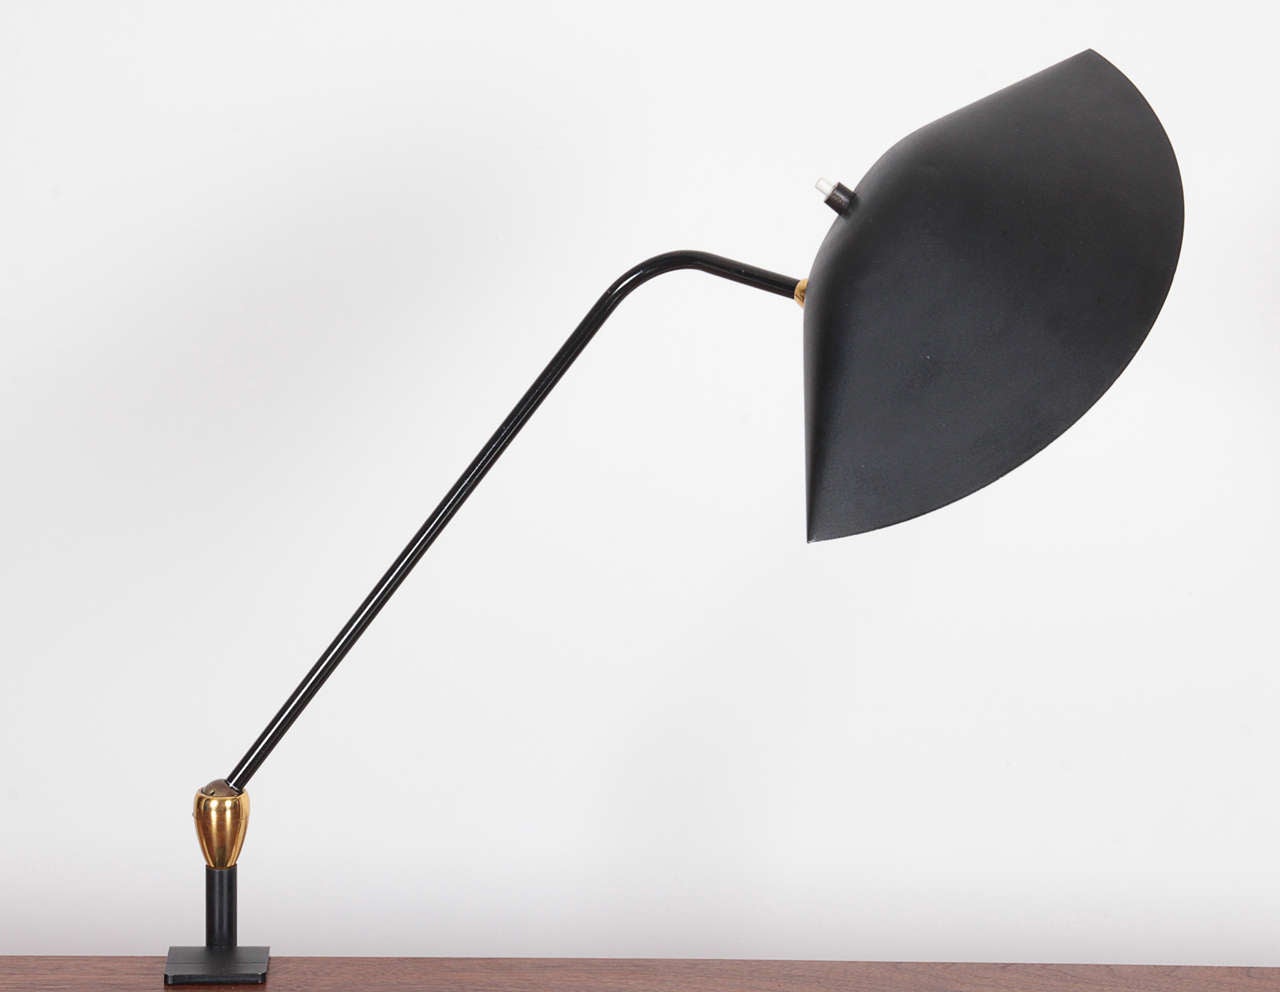 Serge Mouille, 1958, clamp Lamp with two ball and socket joints. Sculpted and painted metal with bronze hardware.